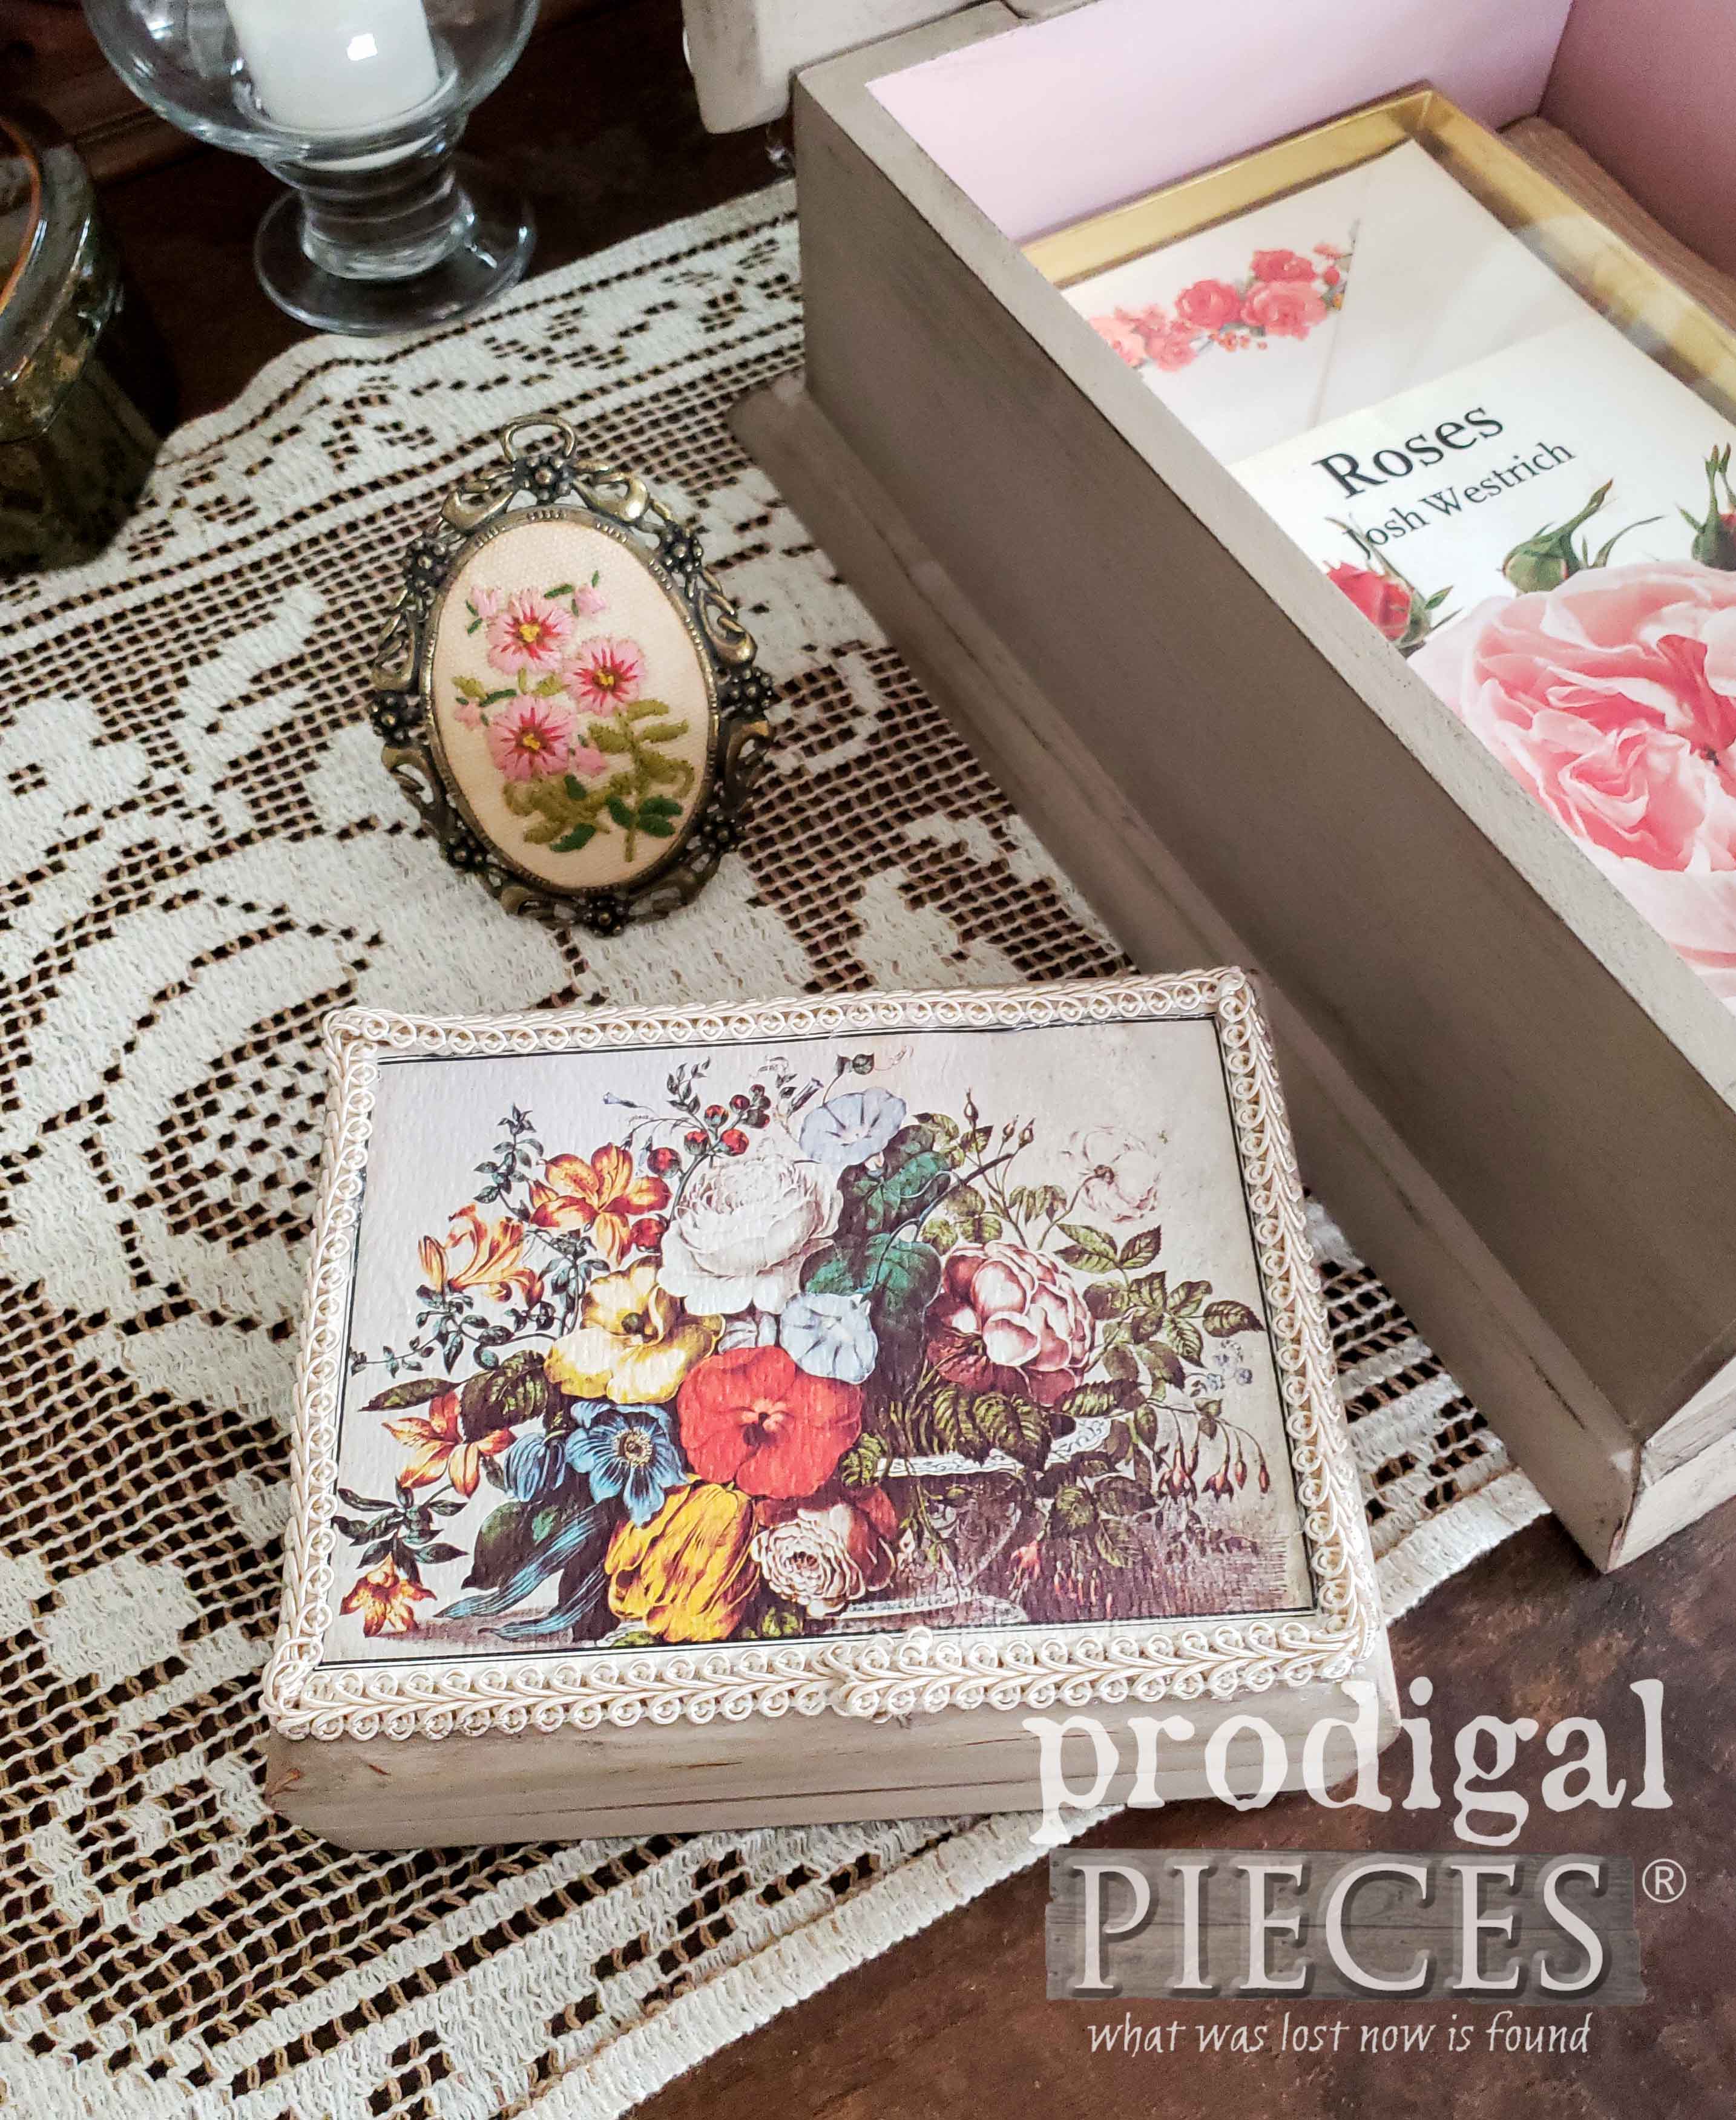 DIY Upcycled Watch Box into Vintage Style Ring Box by Larissa of Prodigal Pieces | prodigalpieces.com #prodigalpieces #handmade #diy #home #vintage #homedecor #shopping #homedecorideas